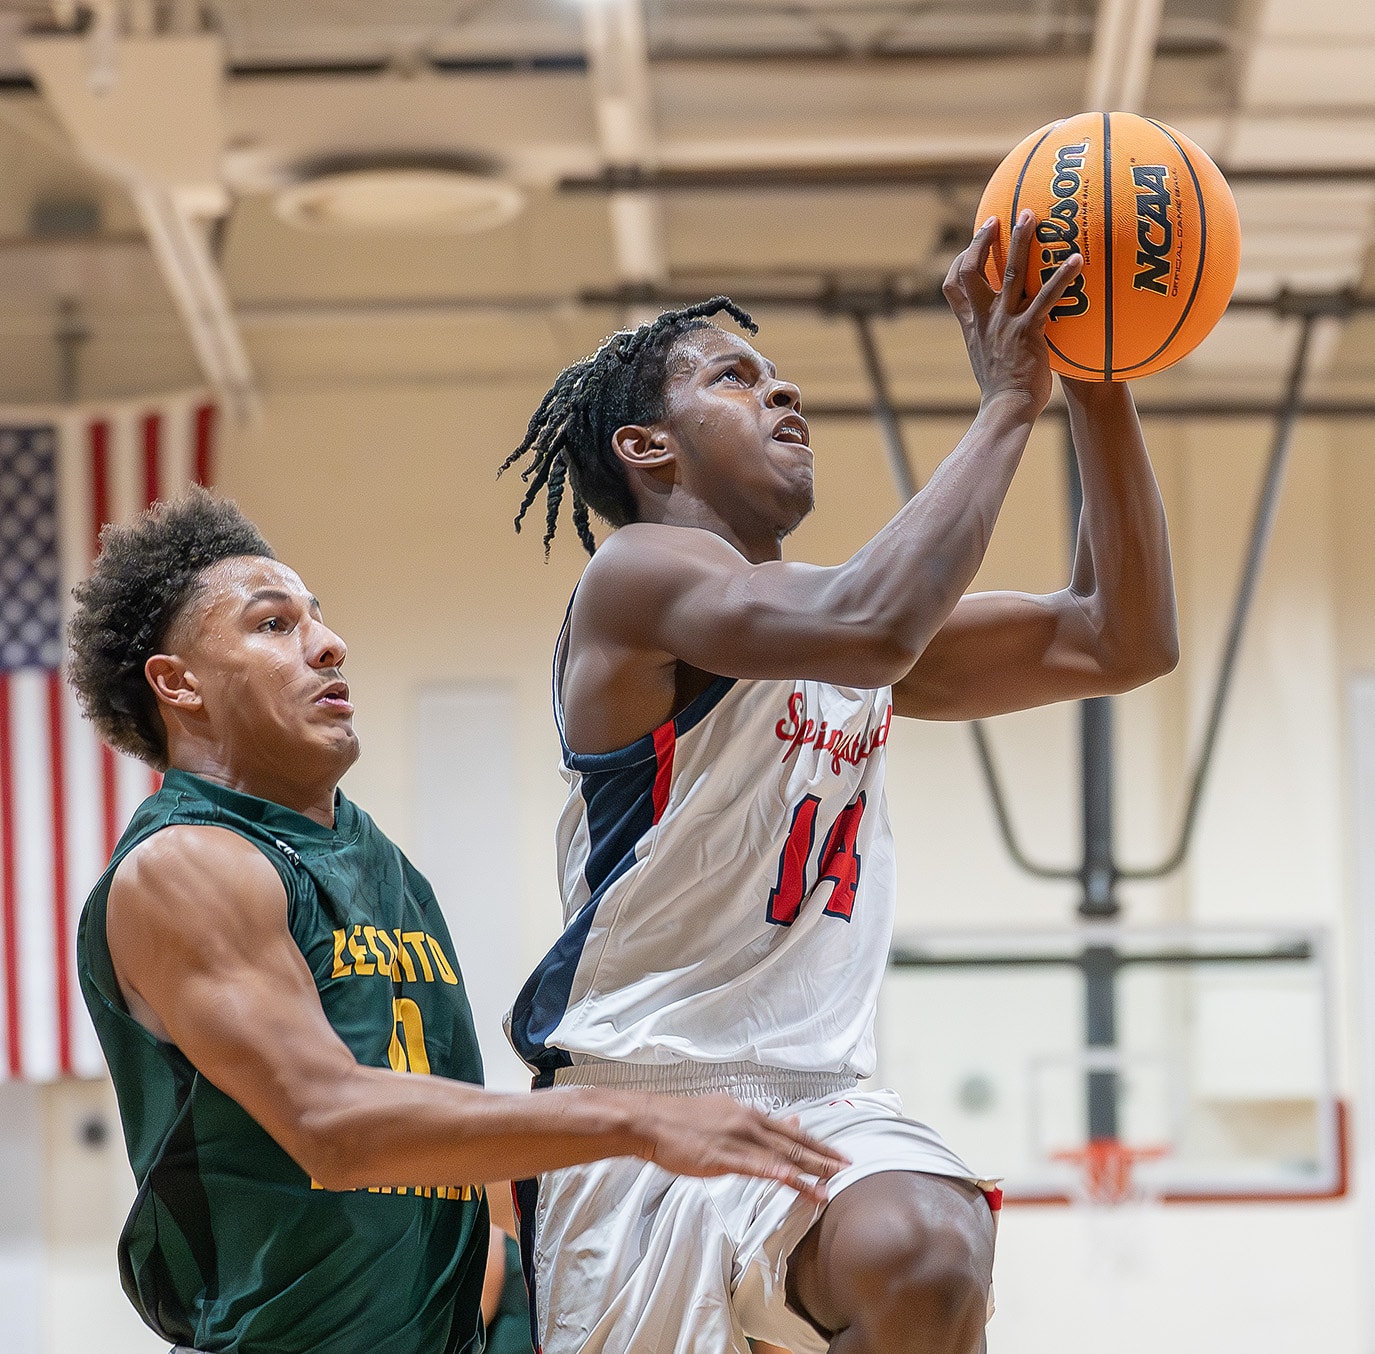 Springstead High's ,14, Zion Mckenzie drives past Lecanto High’s ,0, Caden Moore for a layup Tuesday at Springstead High. Photo by Joe DiCristofalo